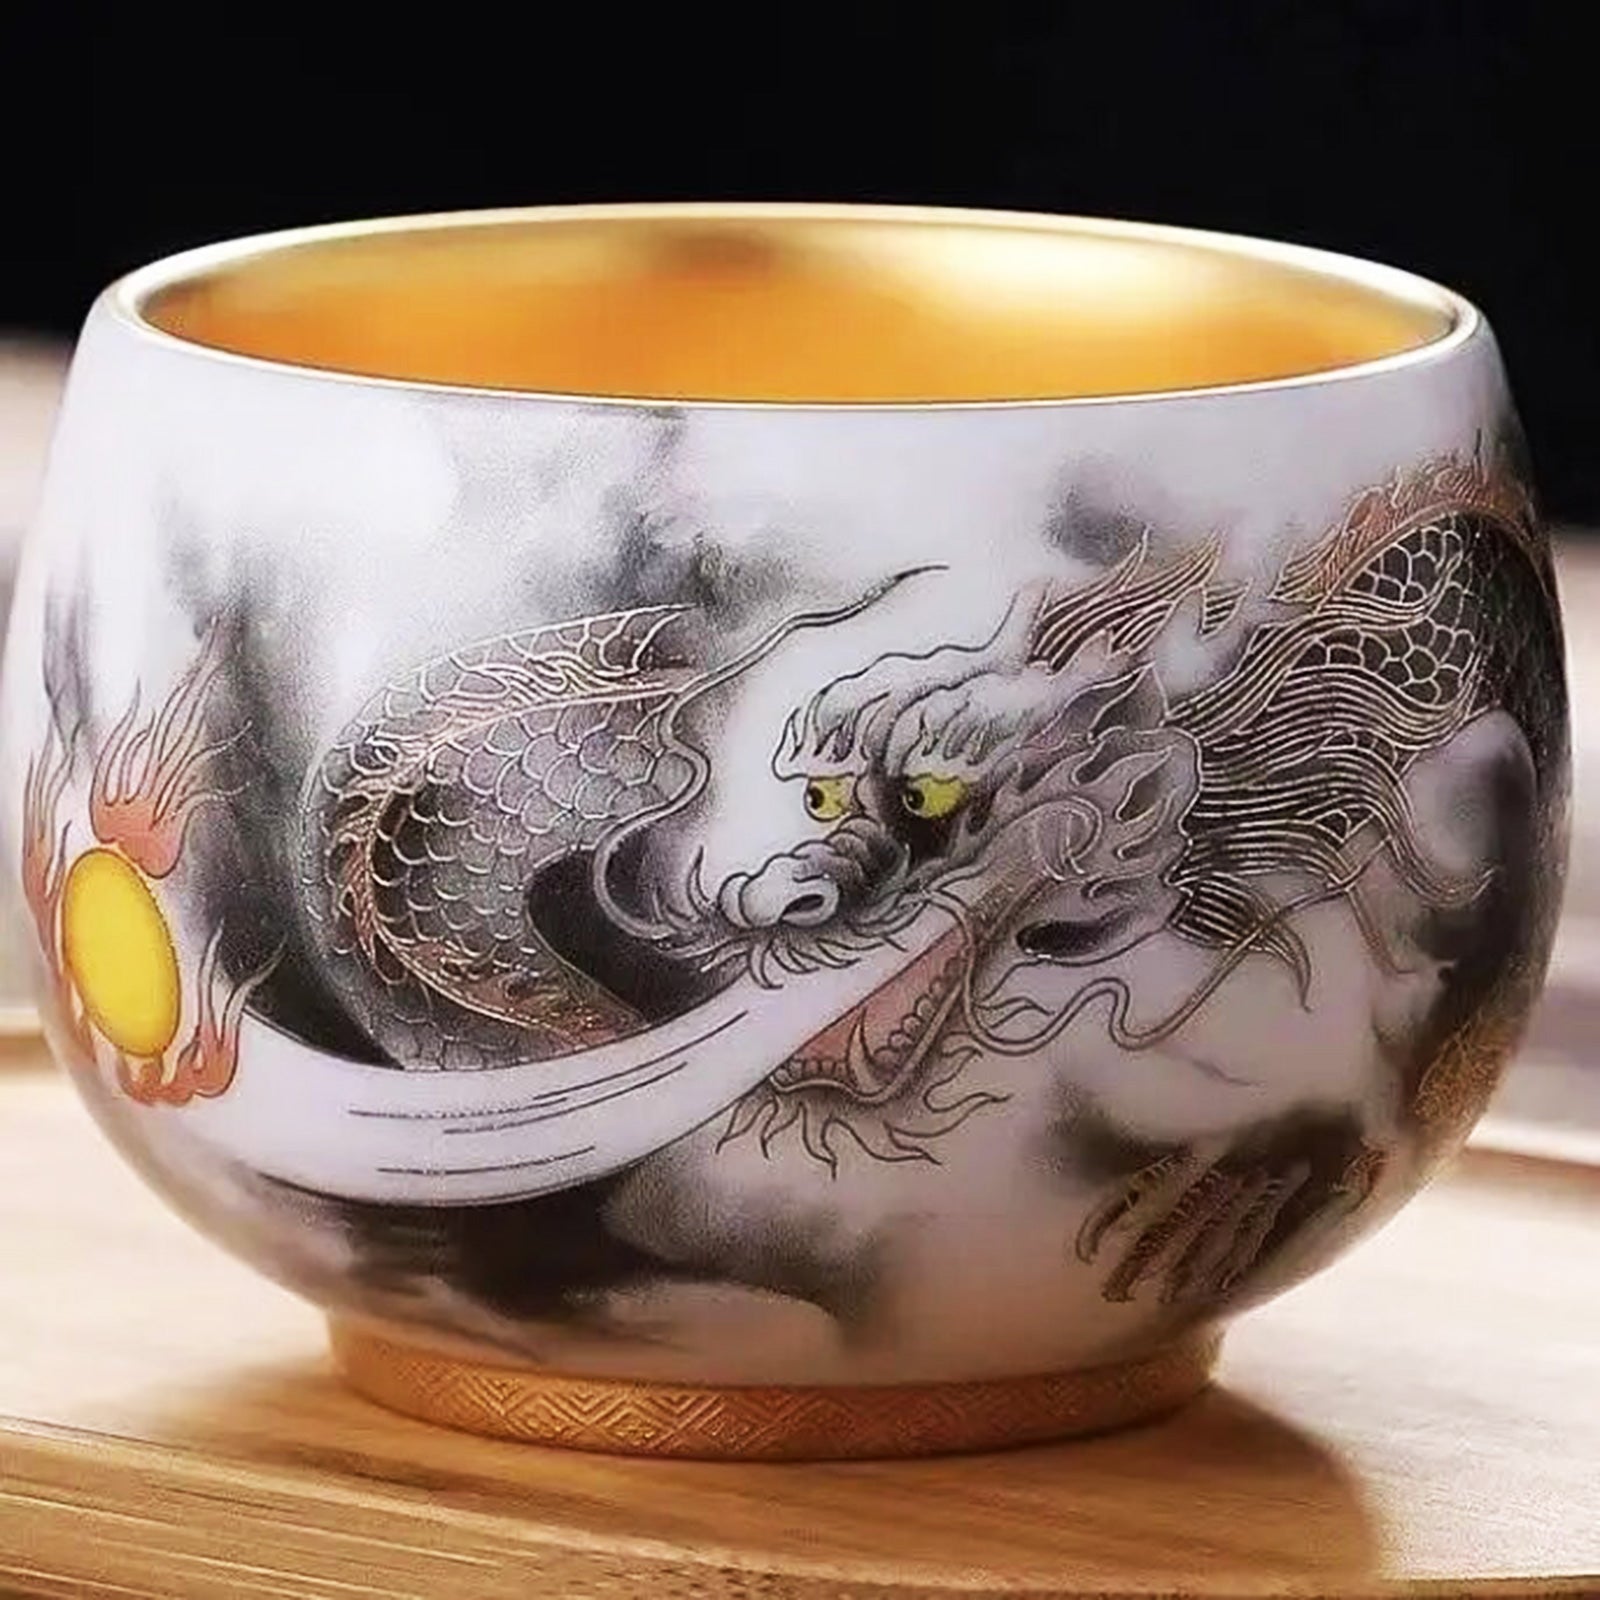 Limited Edition Dragon Tea Cups with Gilded Interior